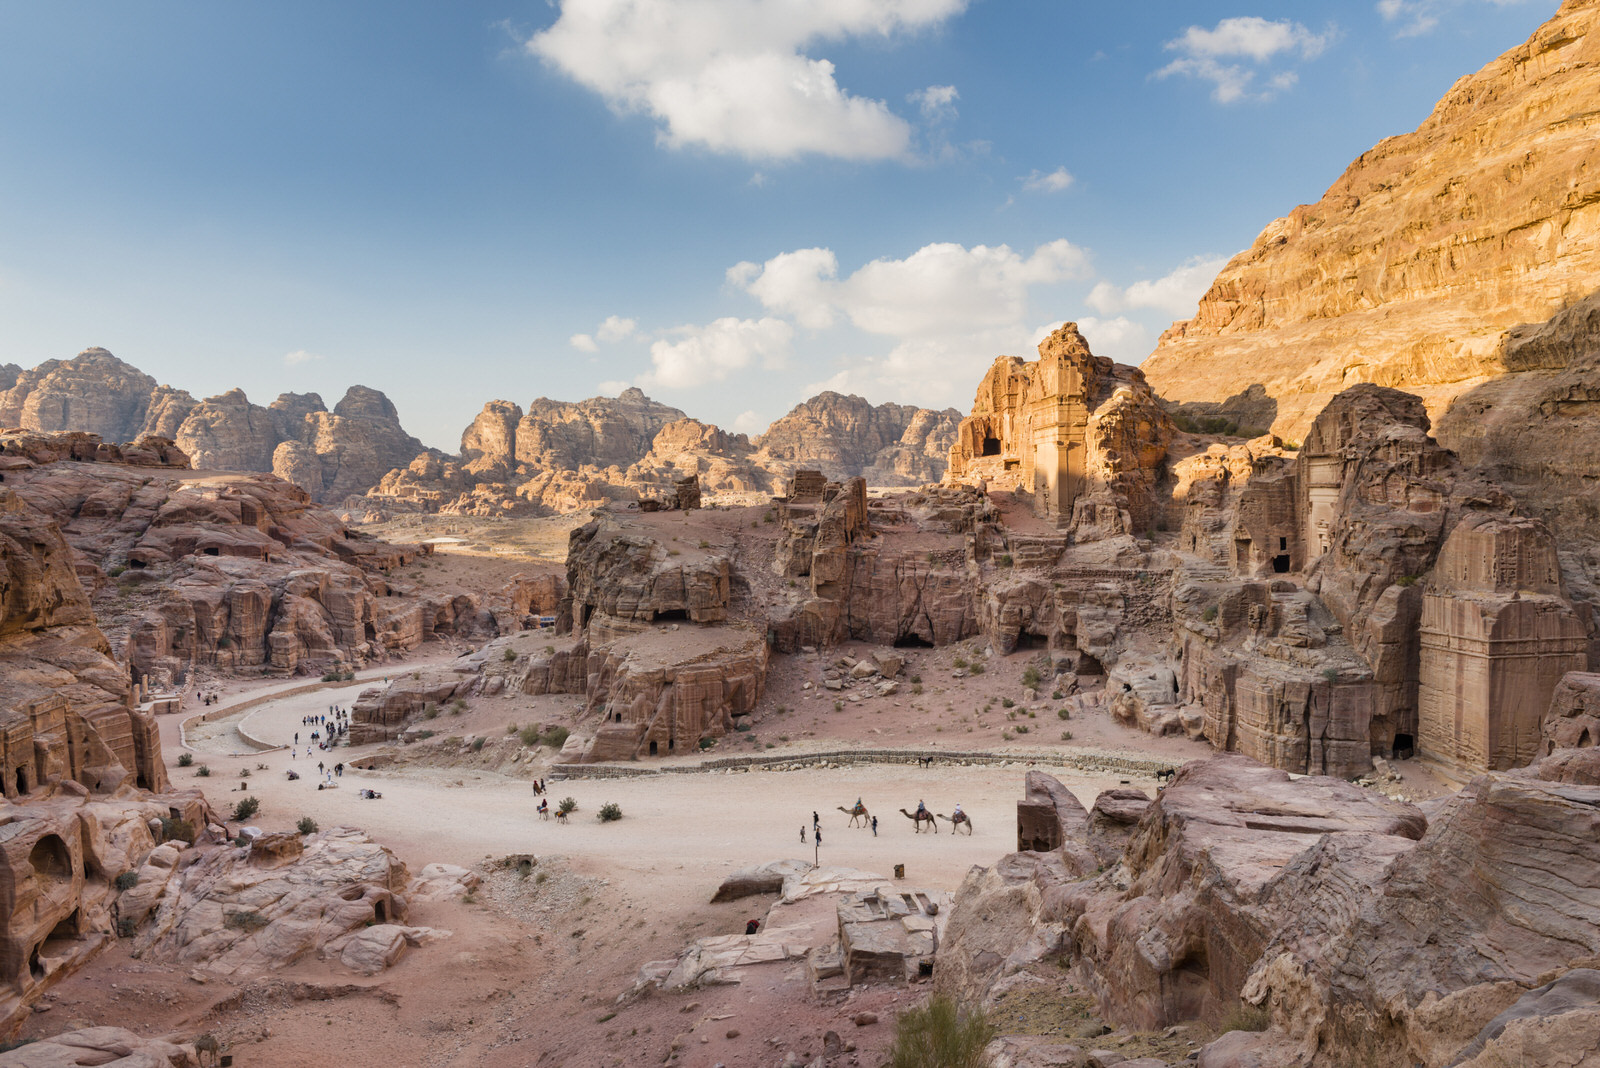 People explore the ancient ruins of Petra.